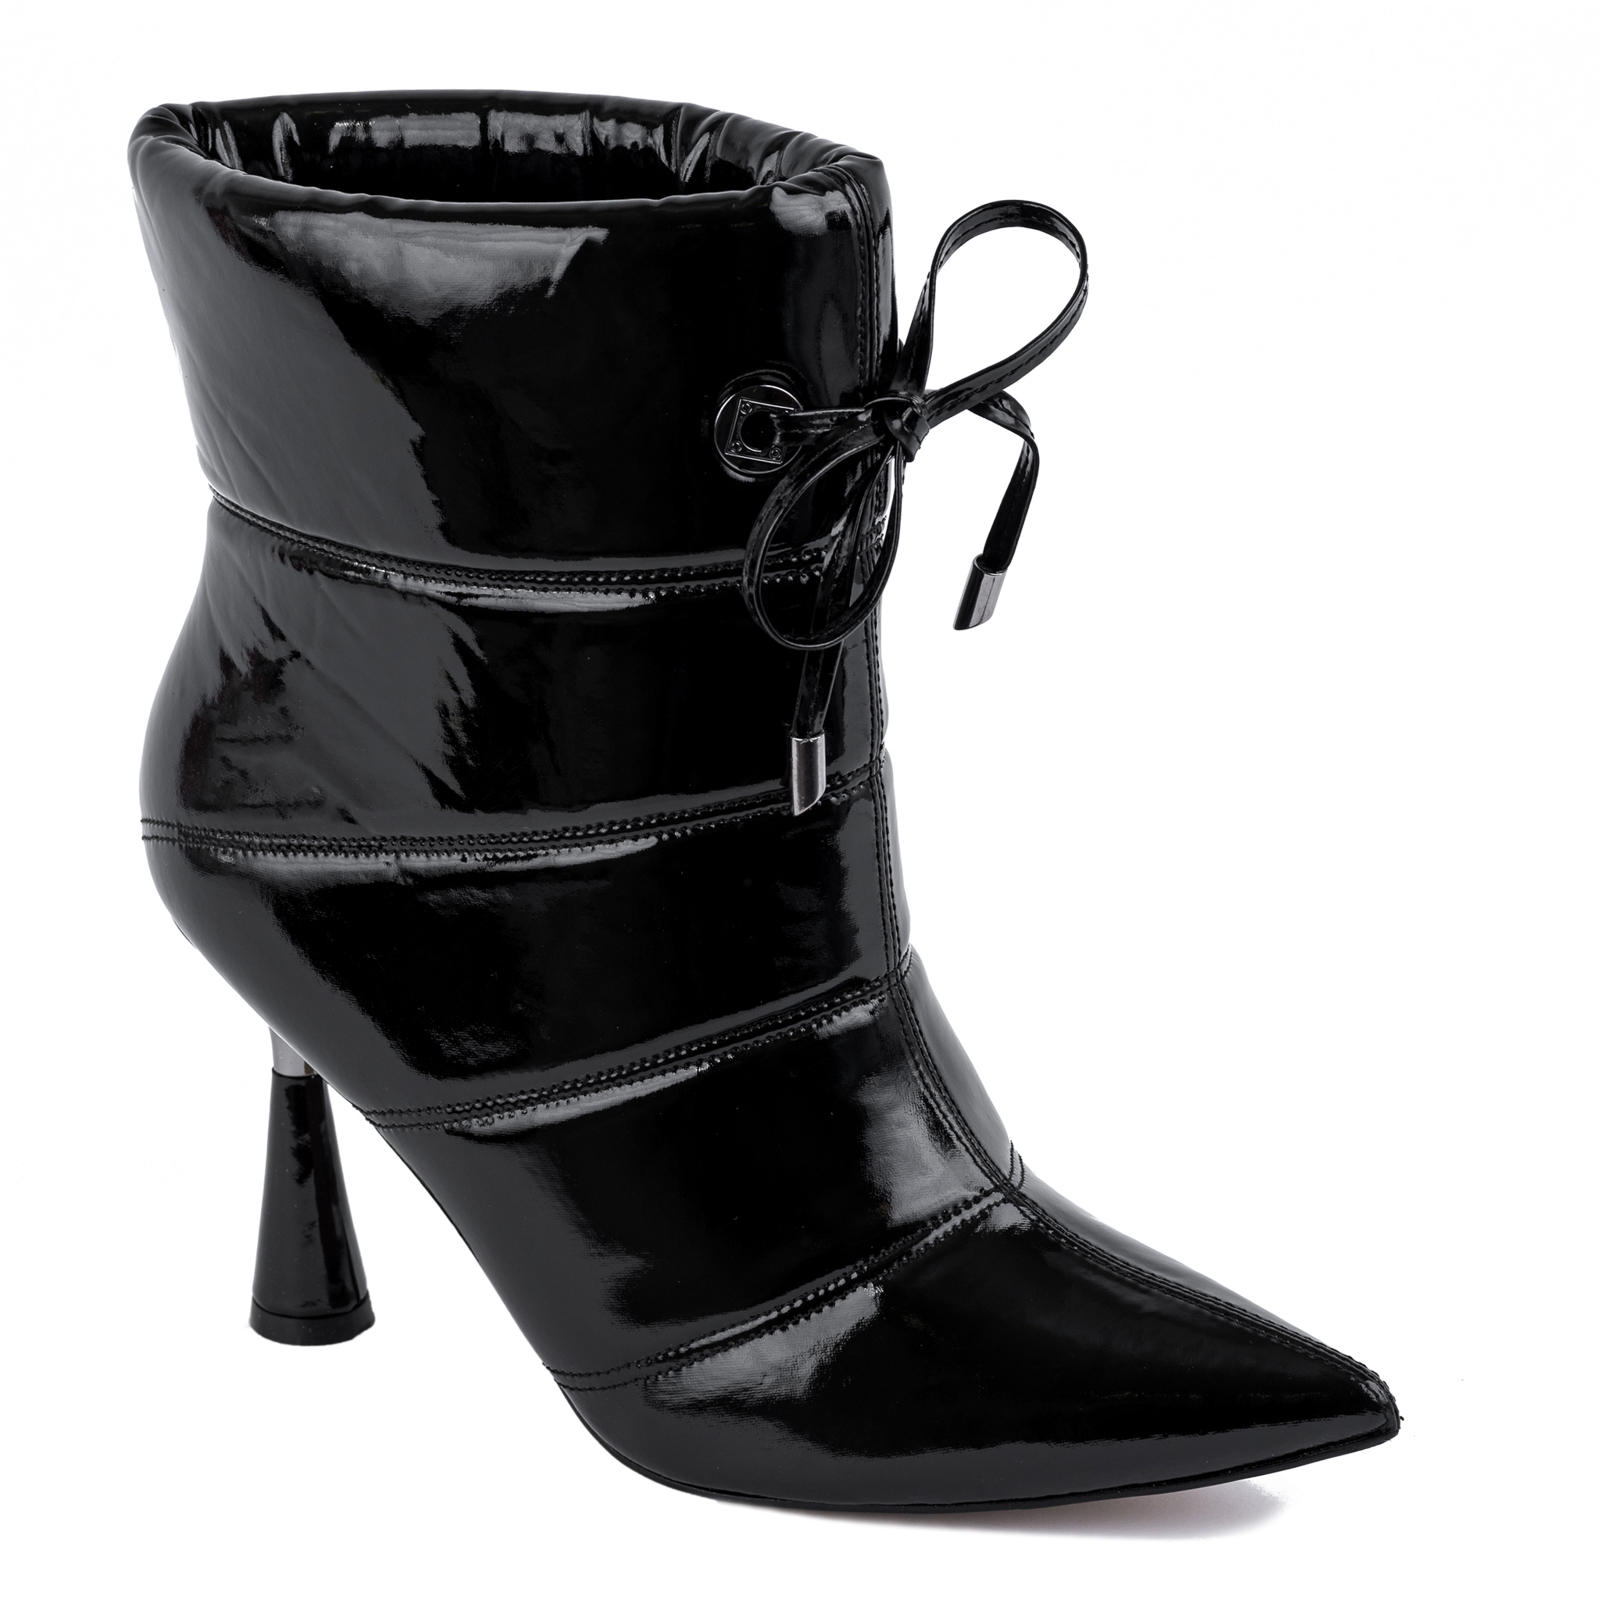 PATENT POINTED ANKLE BOOTS WITH THIN HEEL - BLACK